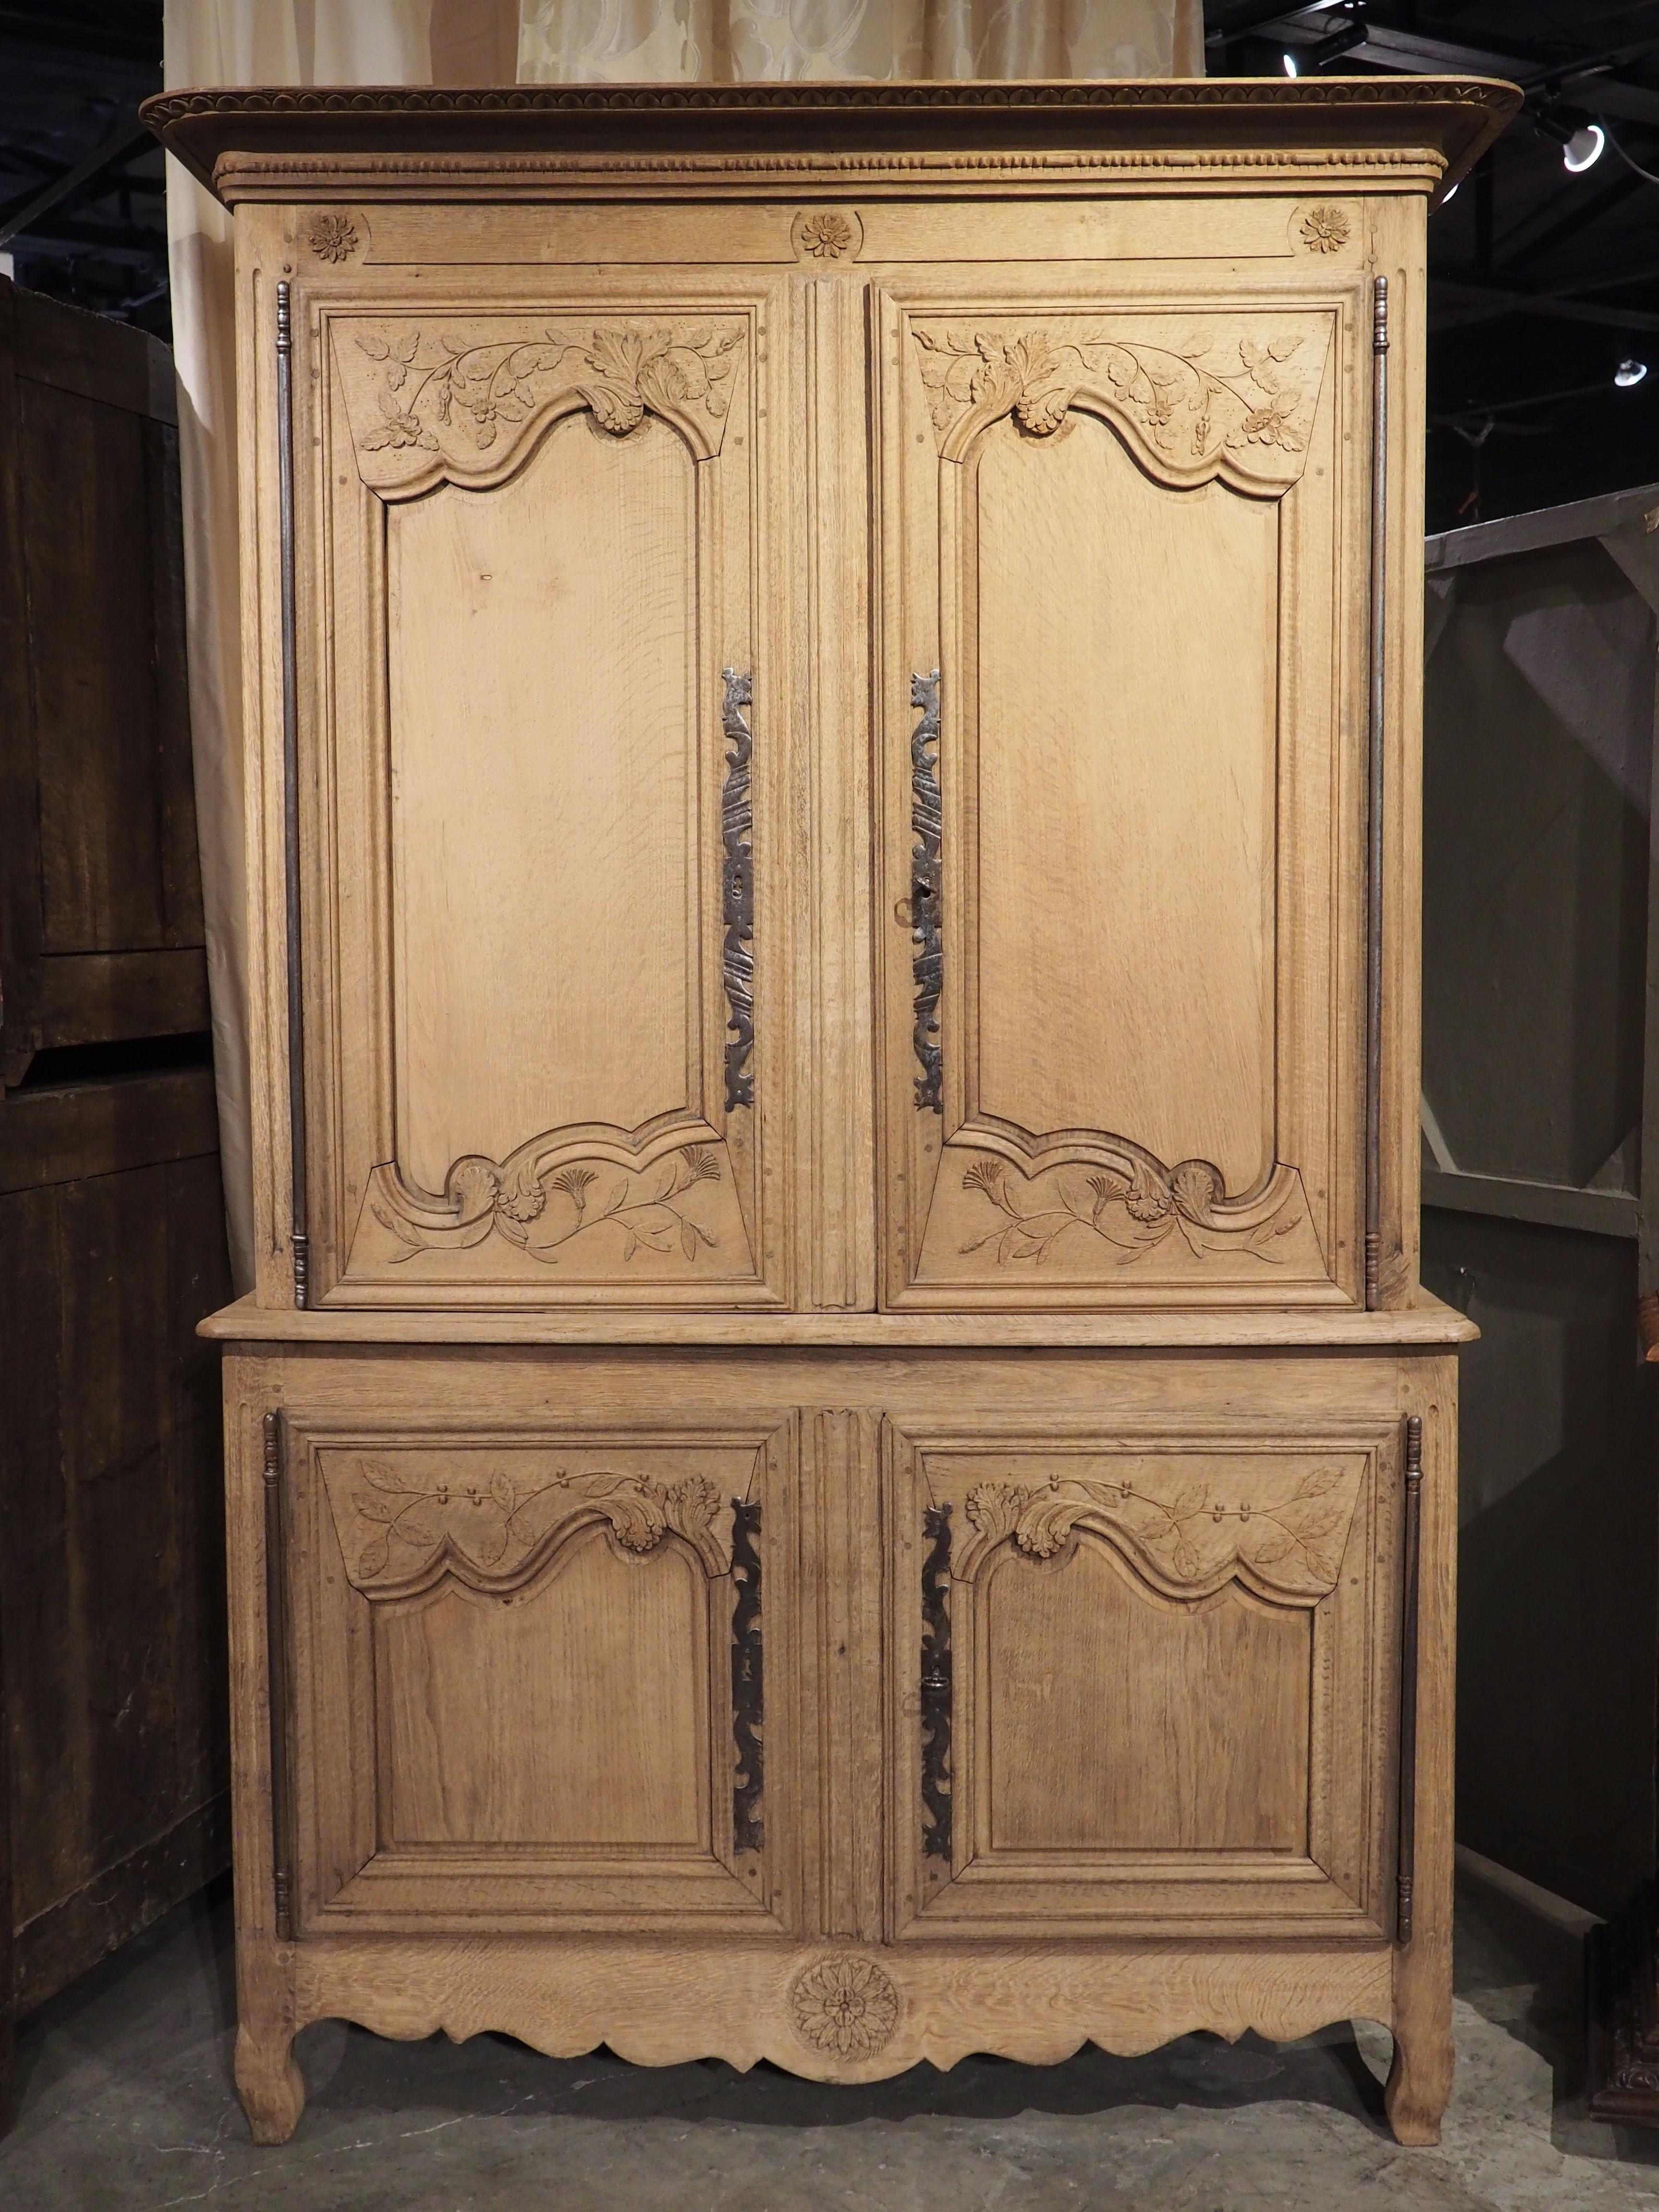 A handsome and robust storage piece, this buffet deux corps was hand-carved in Haute-Normandie (“Upper Normandy”), France during the 19th century. The underside of the flat crown has been embellished with repeating niches above a cavetto molding.